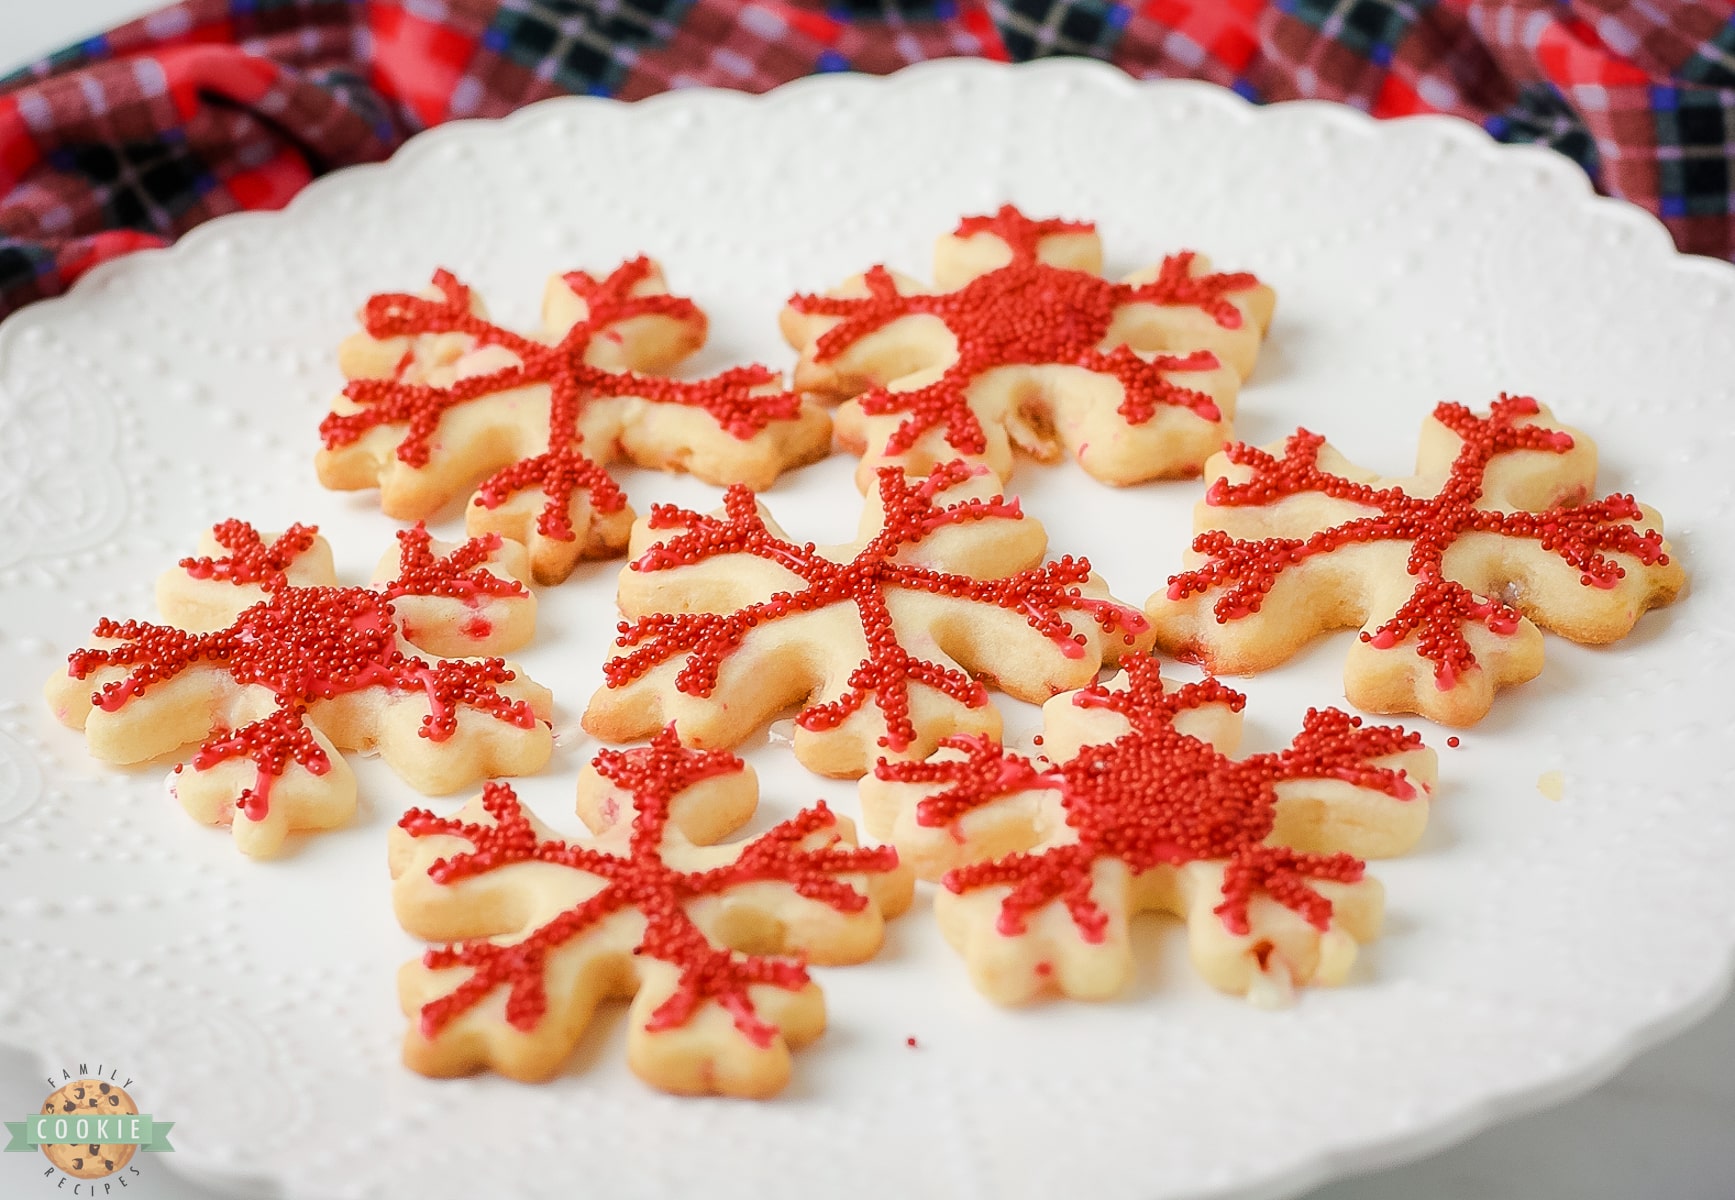 Peppermint Cut Out Cookies on a plate.